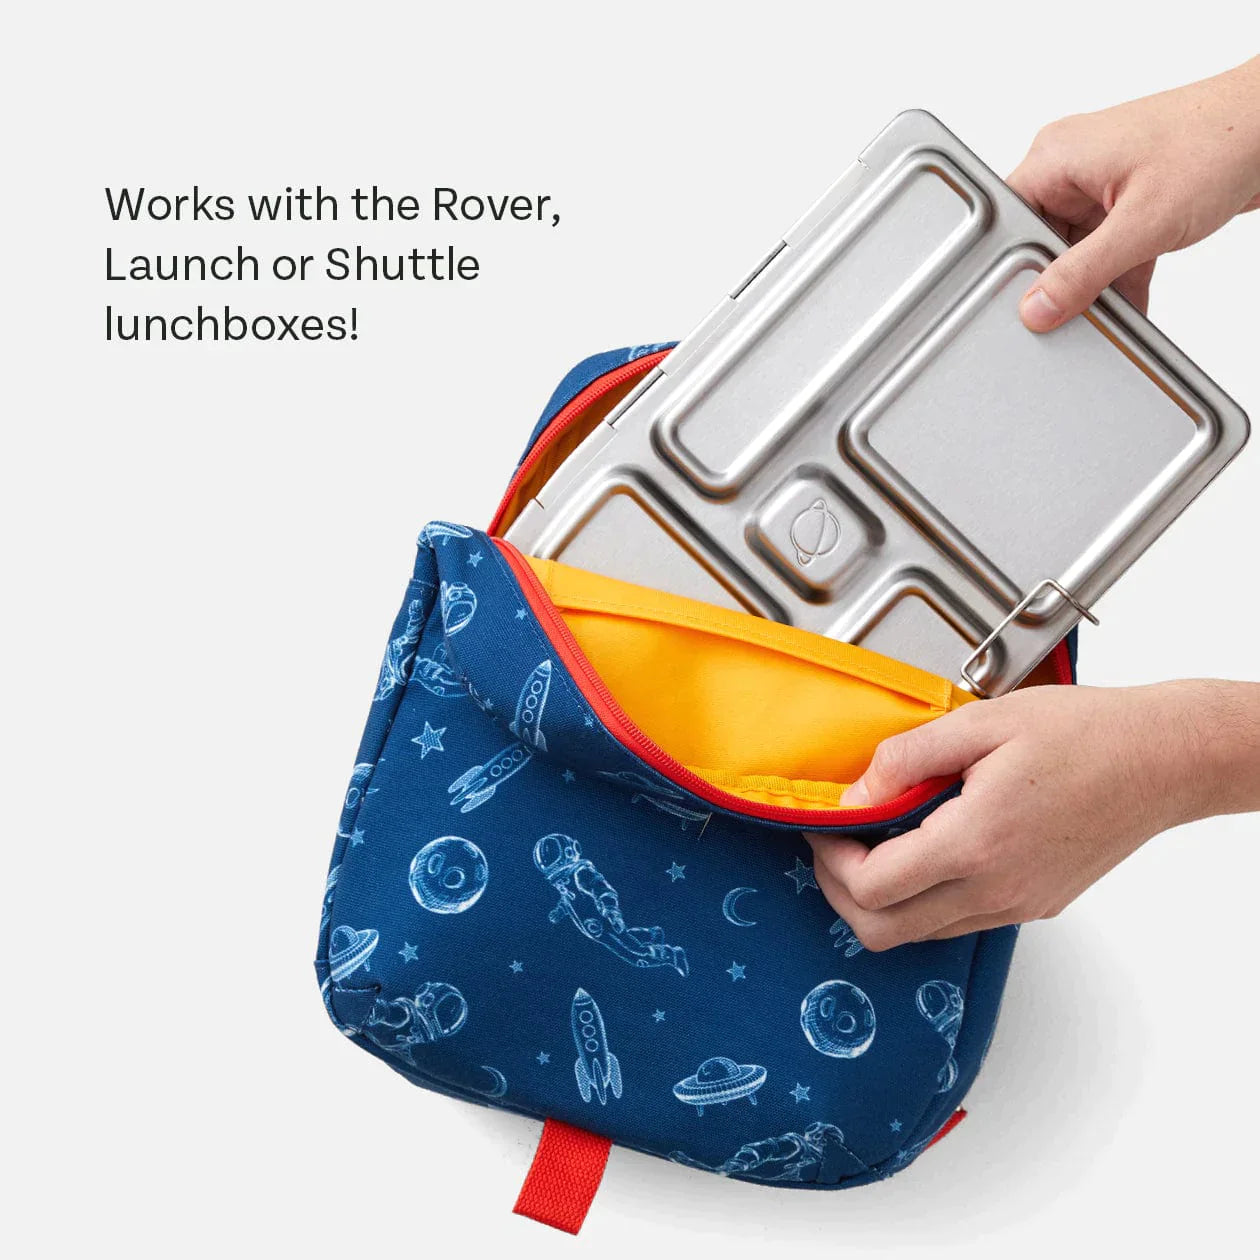 PlanetBox | Lunch Tote Bag - Space